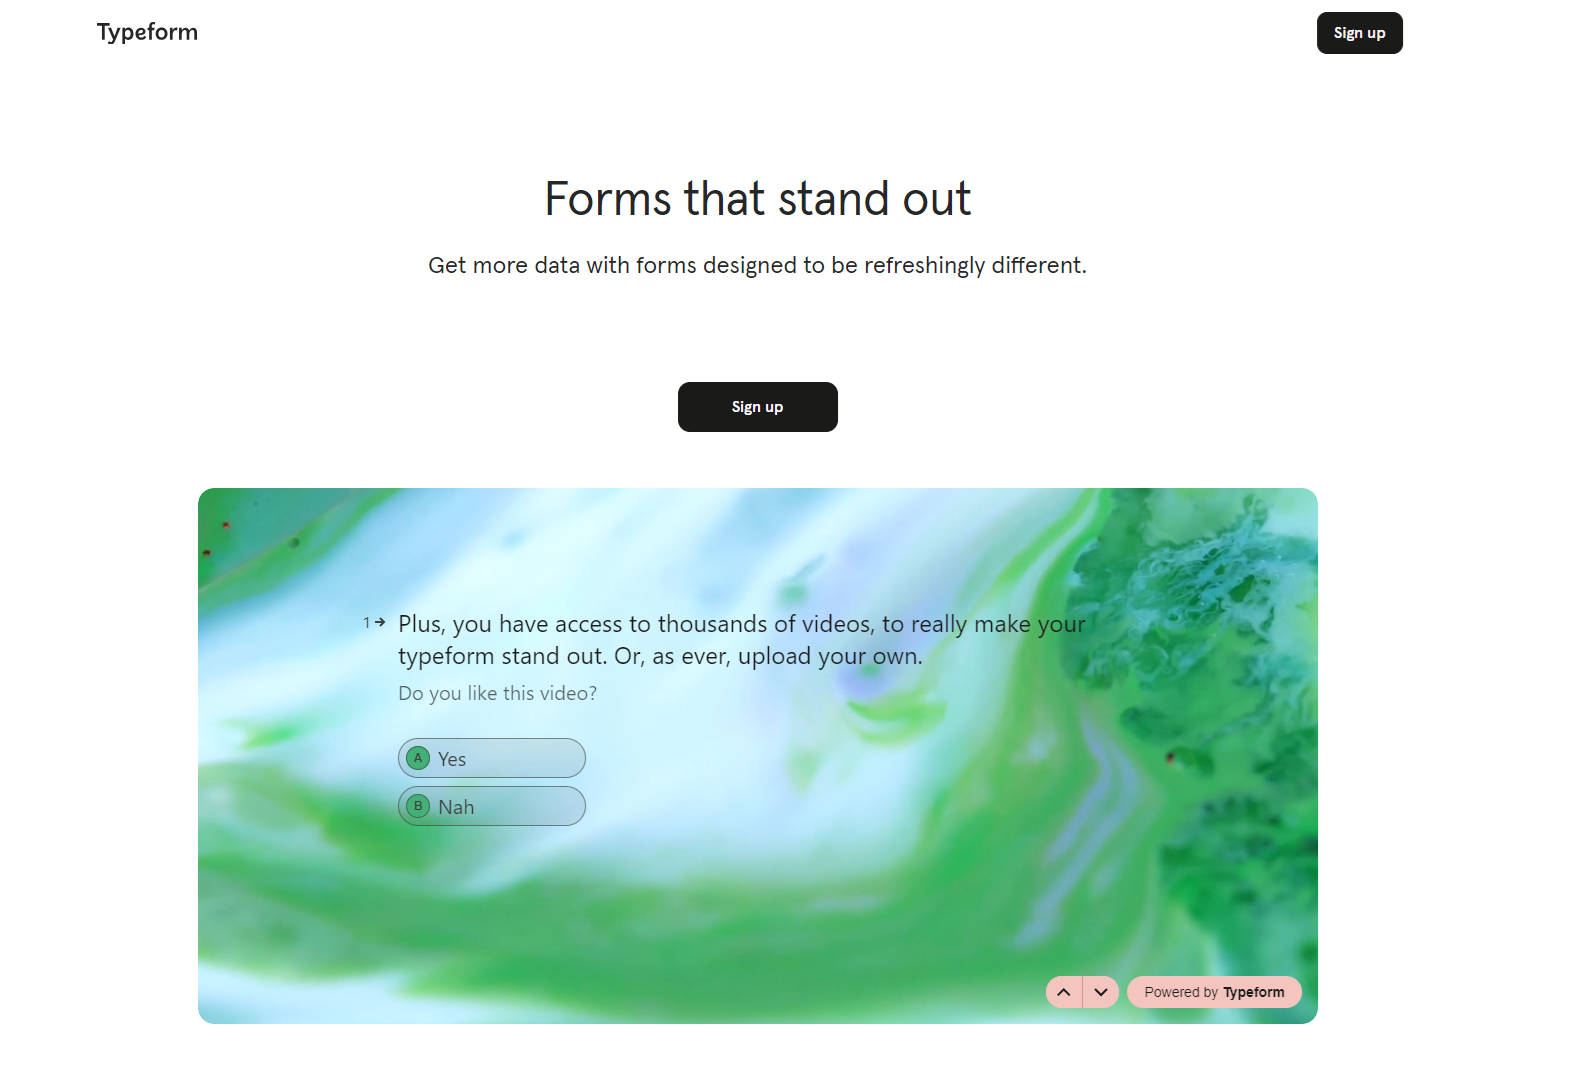  Typeform B2B landing page, with an interactive form